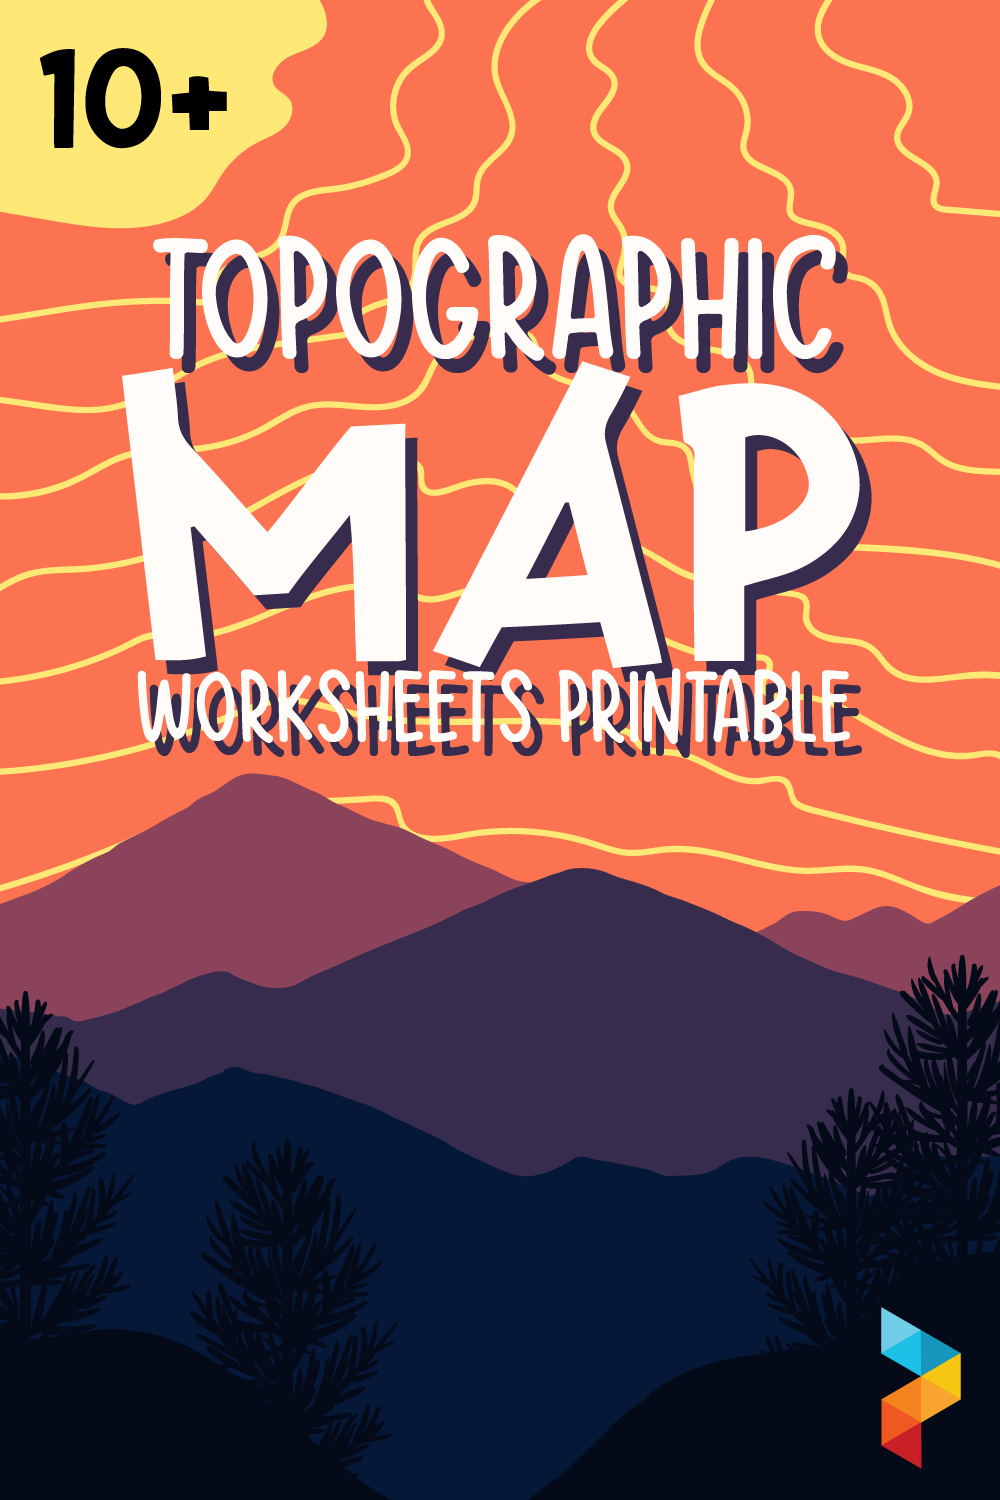 Topographic Map Worksheets Printable